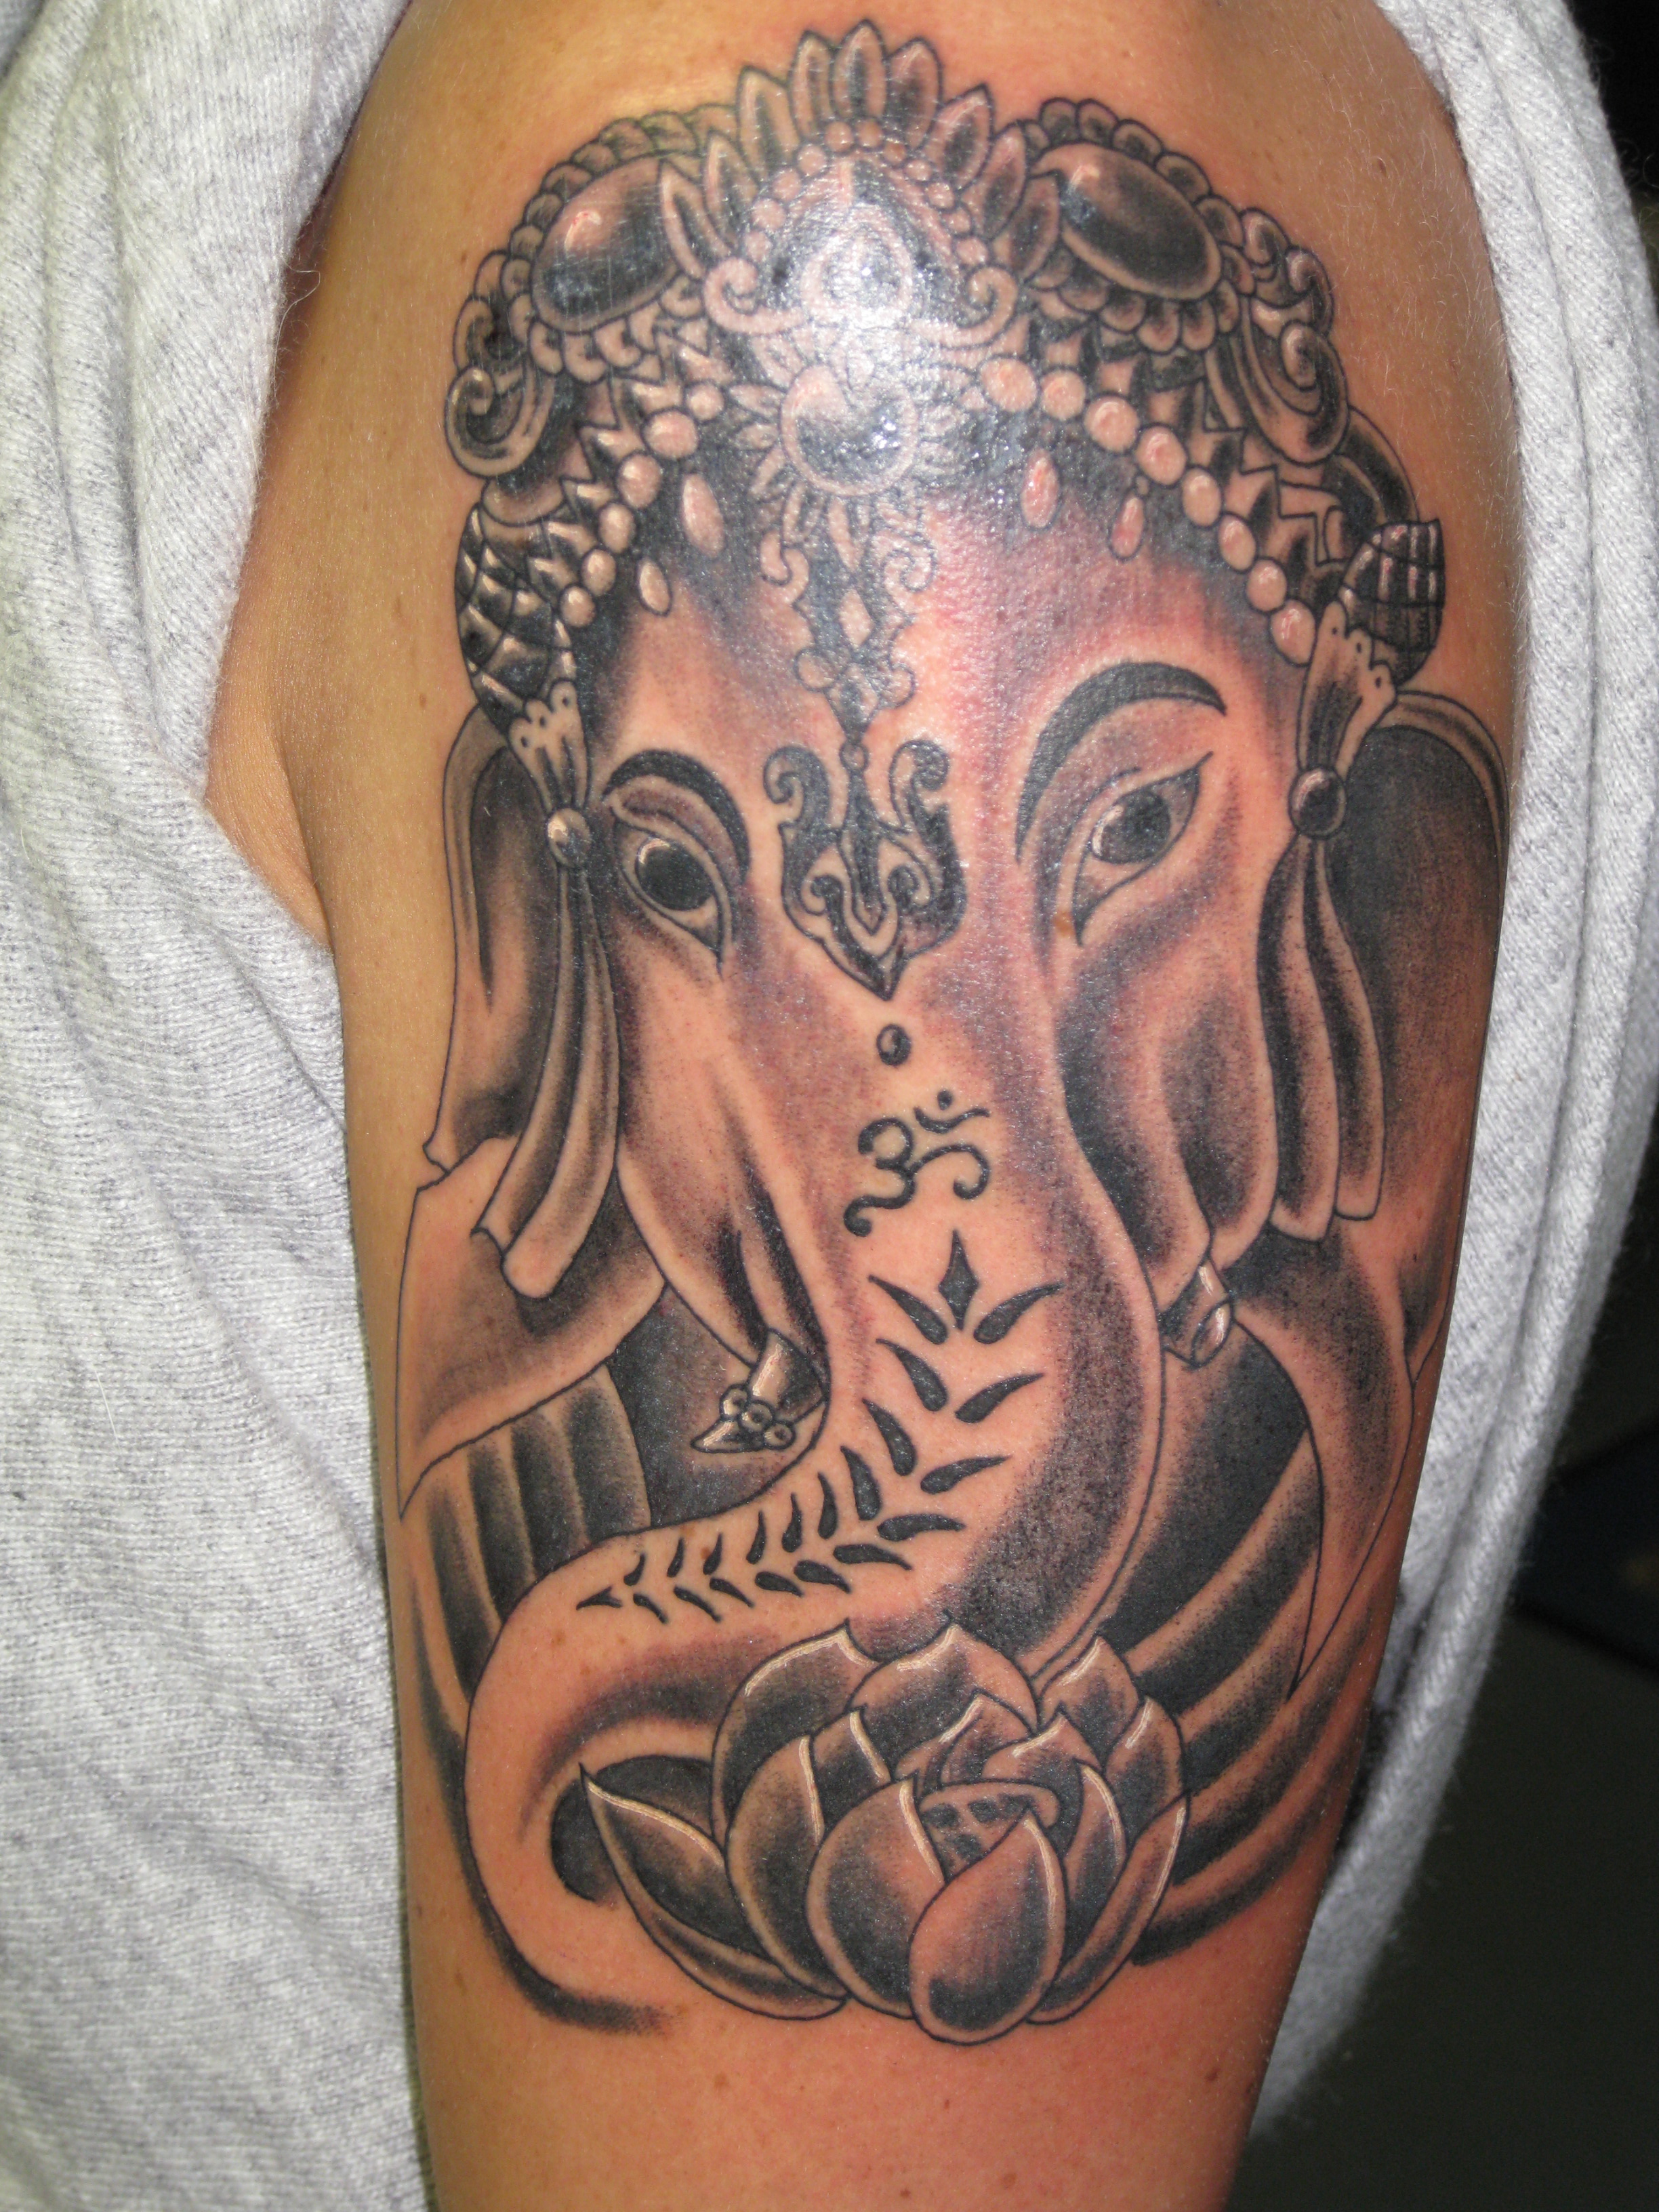 Elephant Tattoos Designs, Ideas and Meaning - Tattoos For You